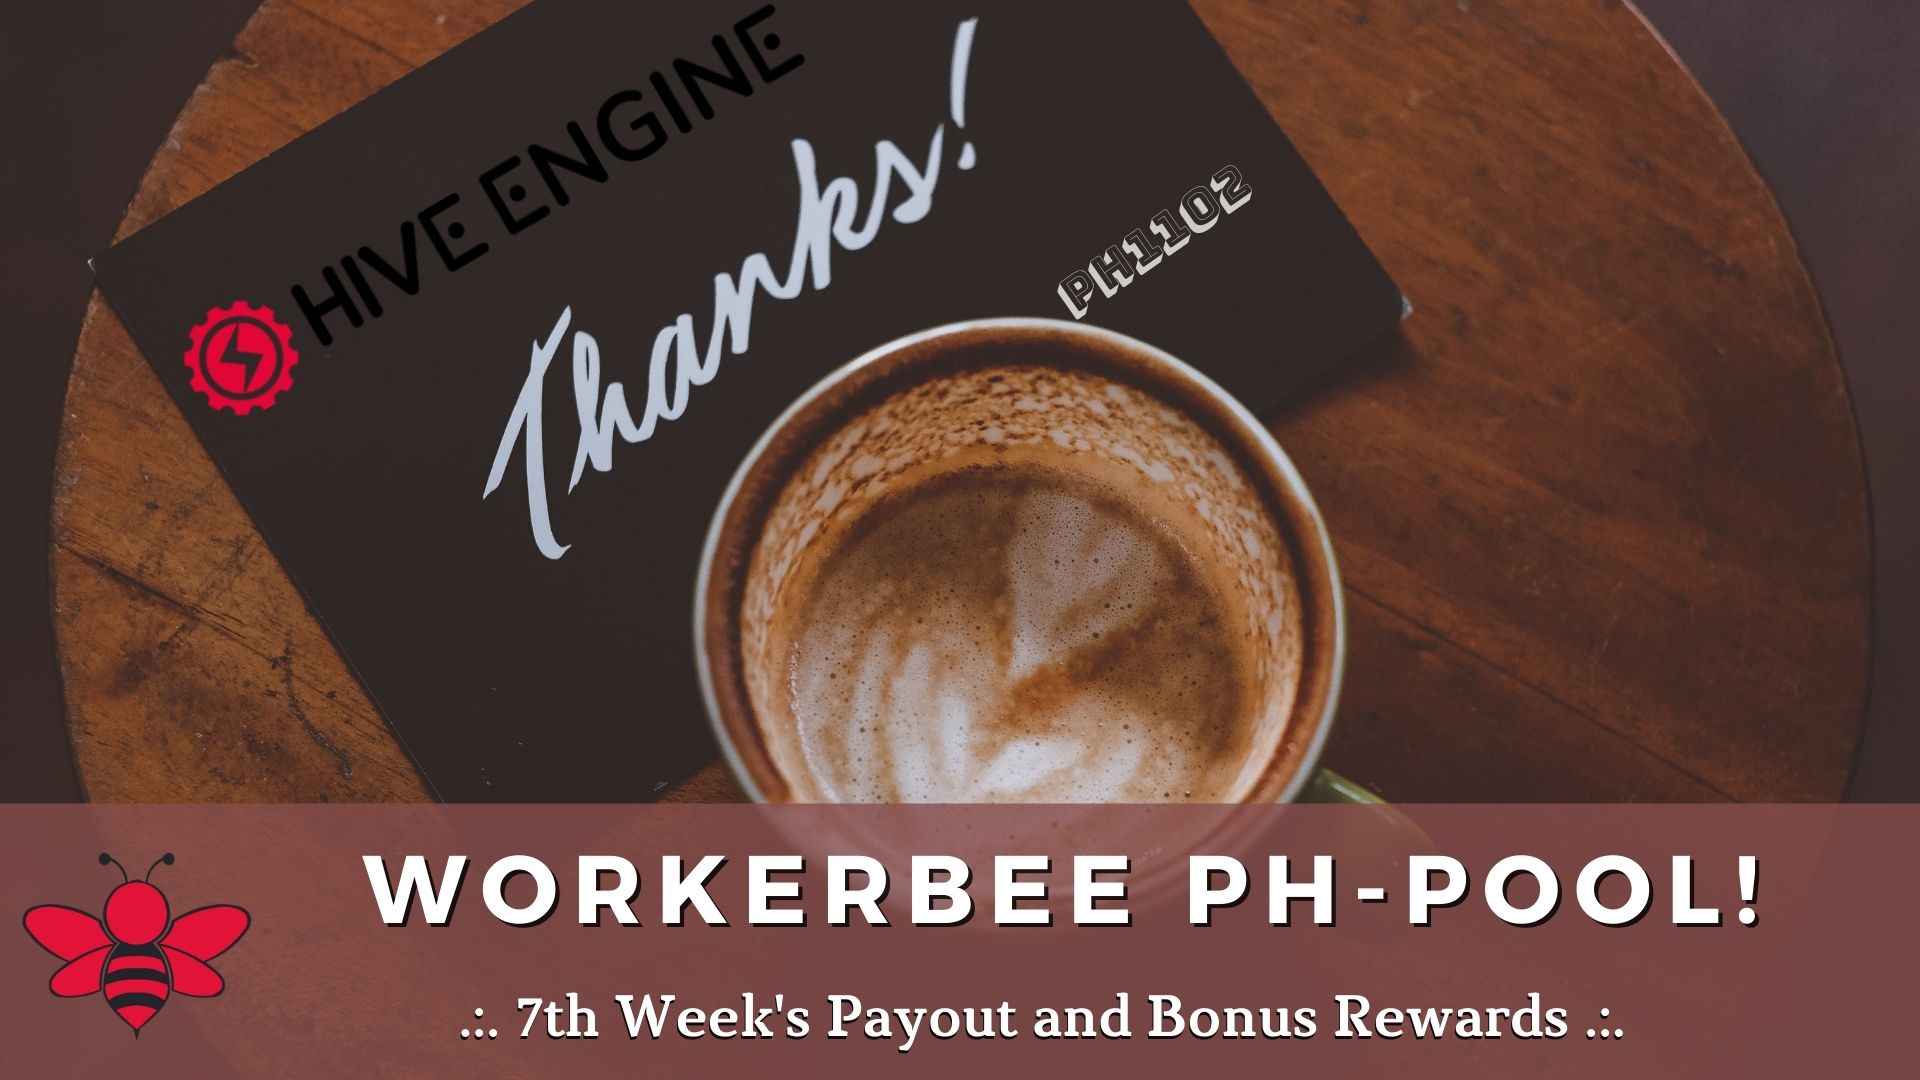 @ph1102/not-a-record-but-apy-is-again-over-30-workerbee-ph-pool-week-7